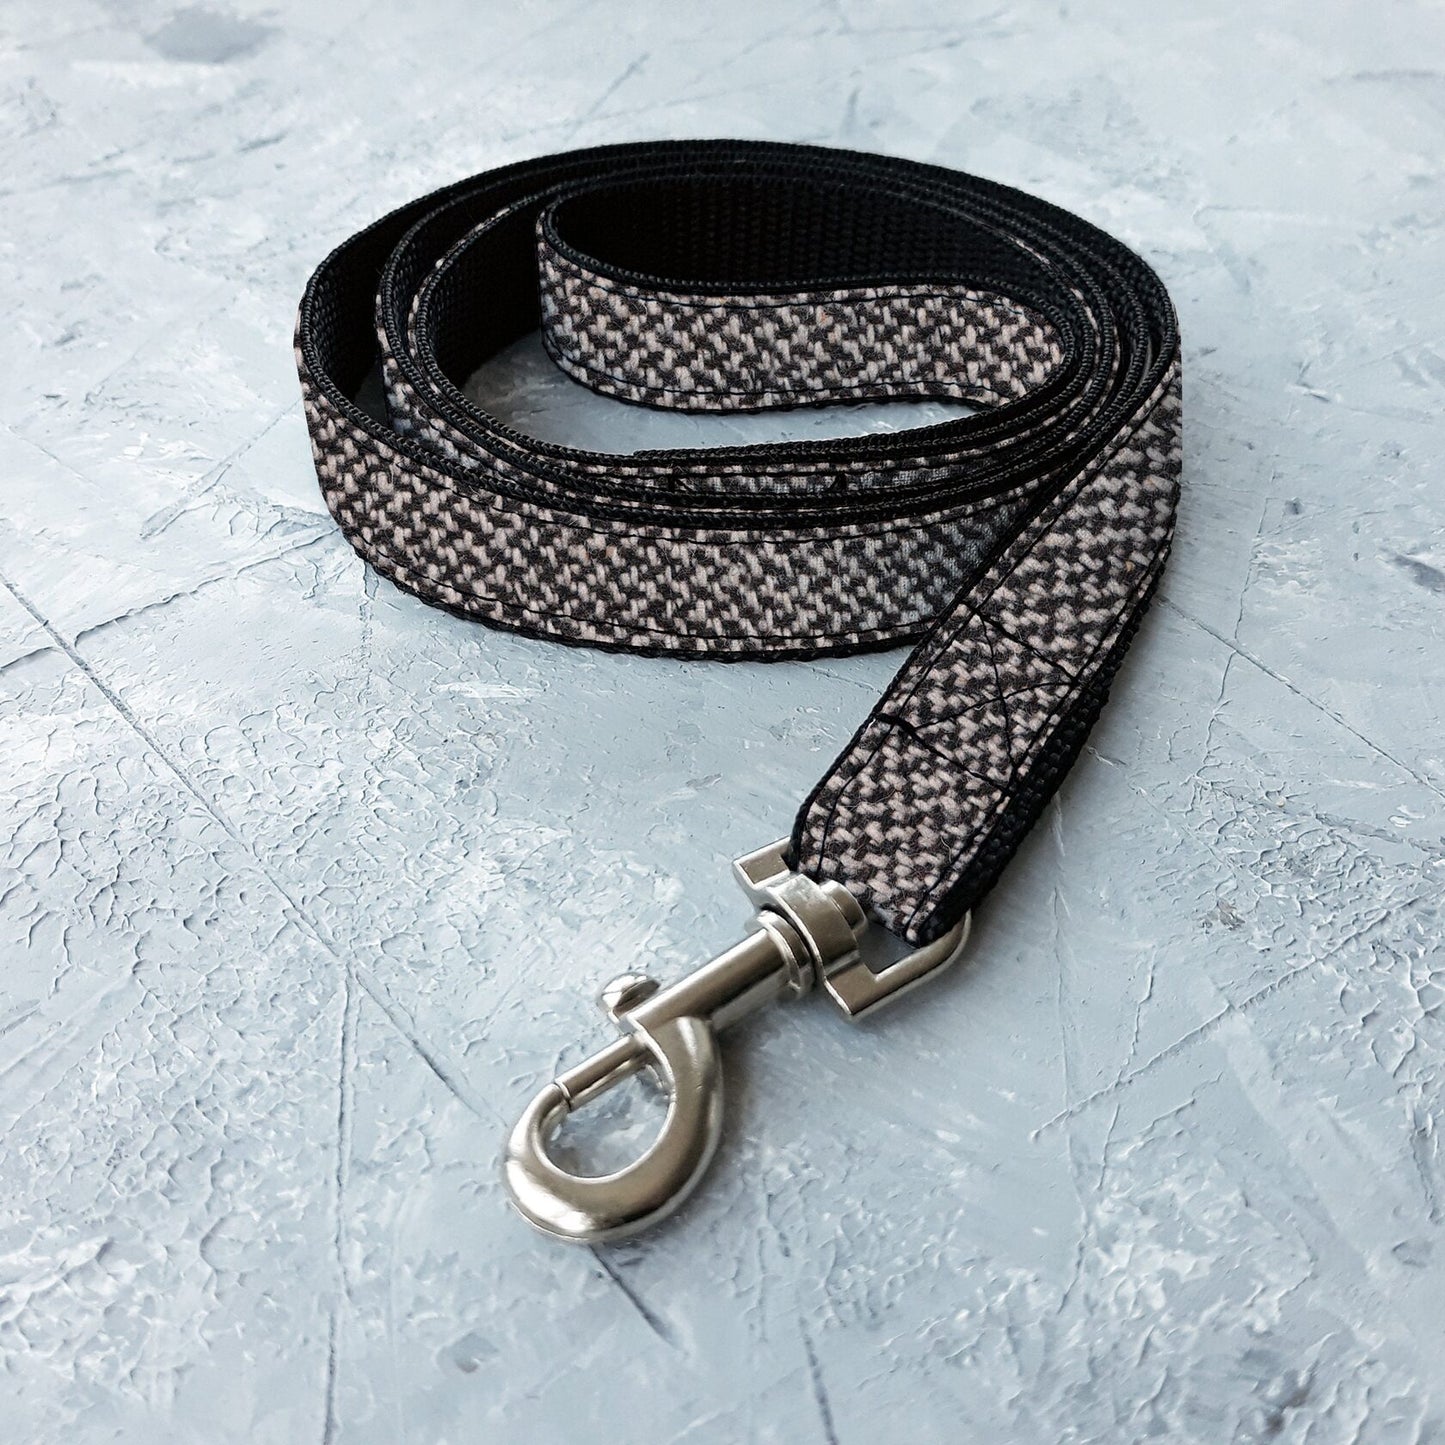 Tweed leash for cat. Black and White. 8 feet